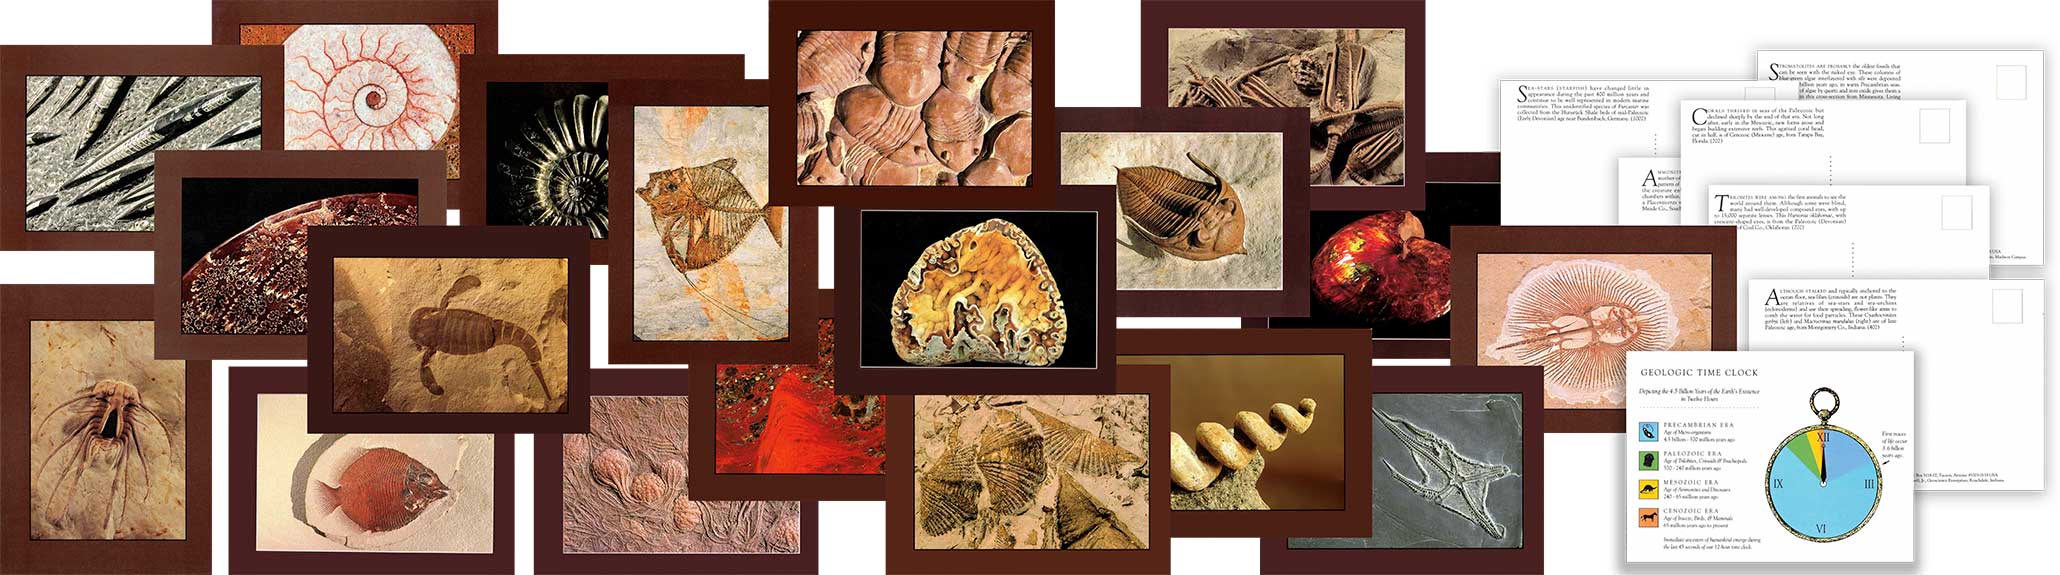 Fossils Inside Out, Wild Horizons, Author Tom Wiewandt, A Global Fusion of Science, Art, and Culture, Brings Fossil Industry to Life,